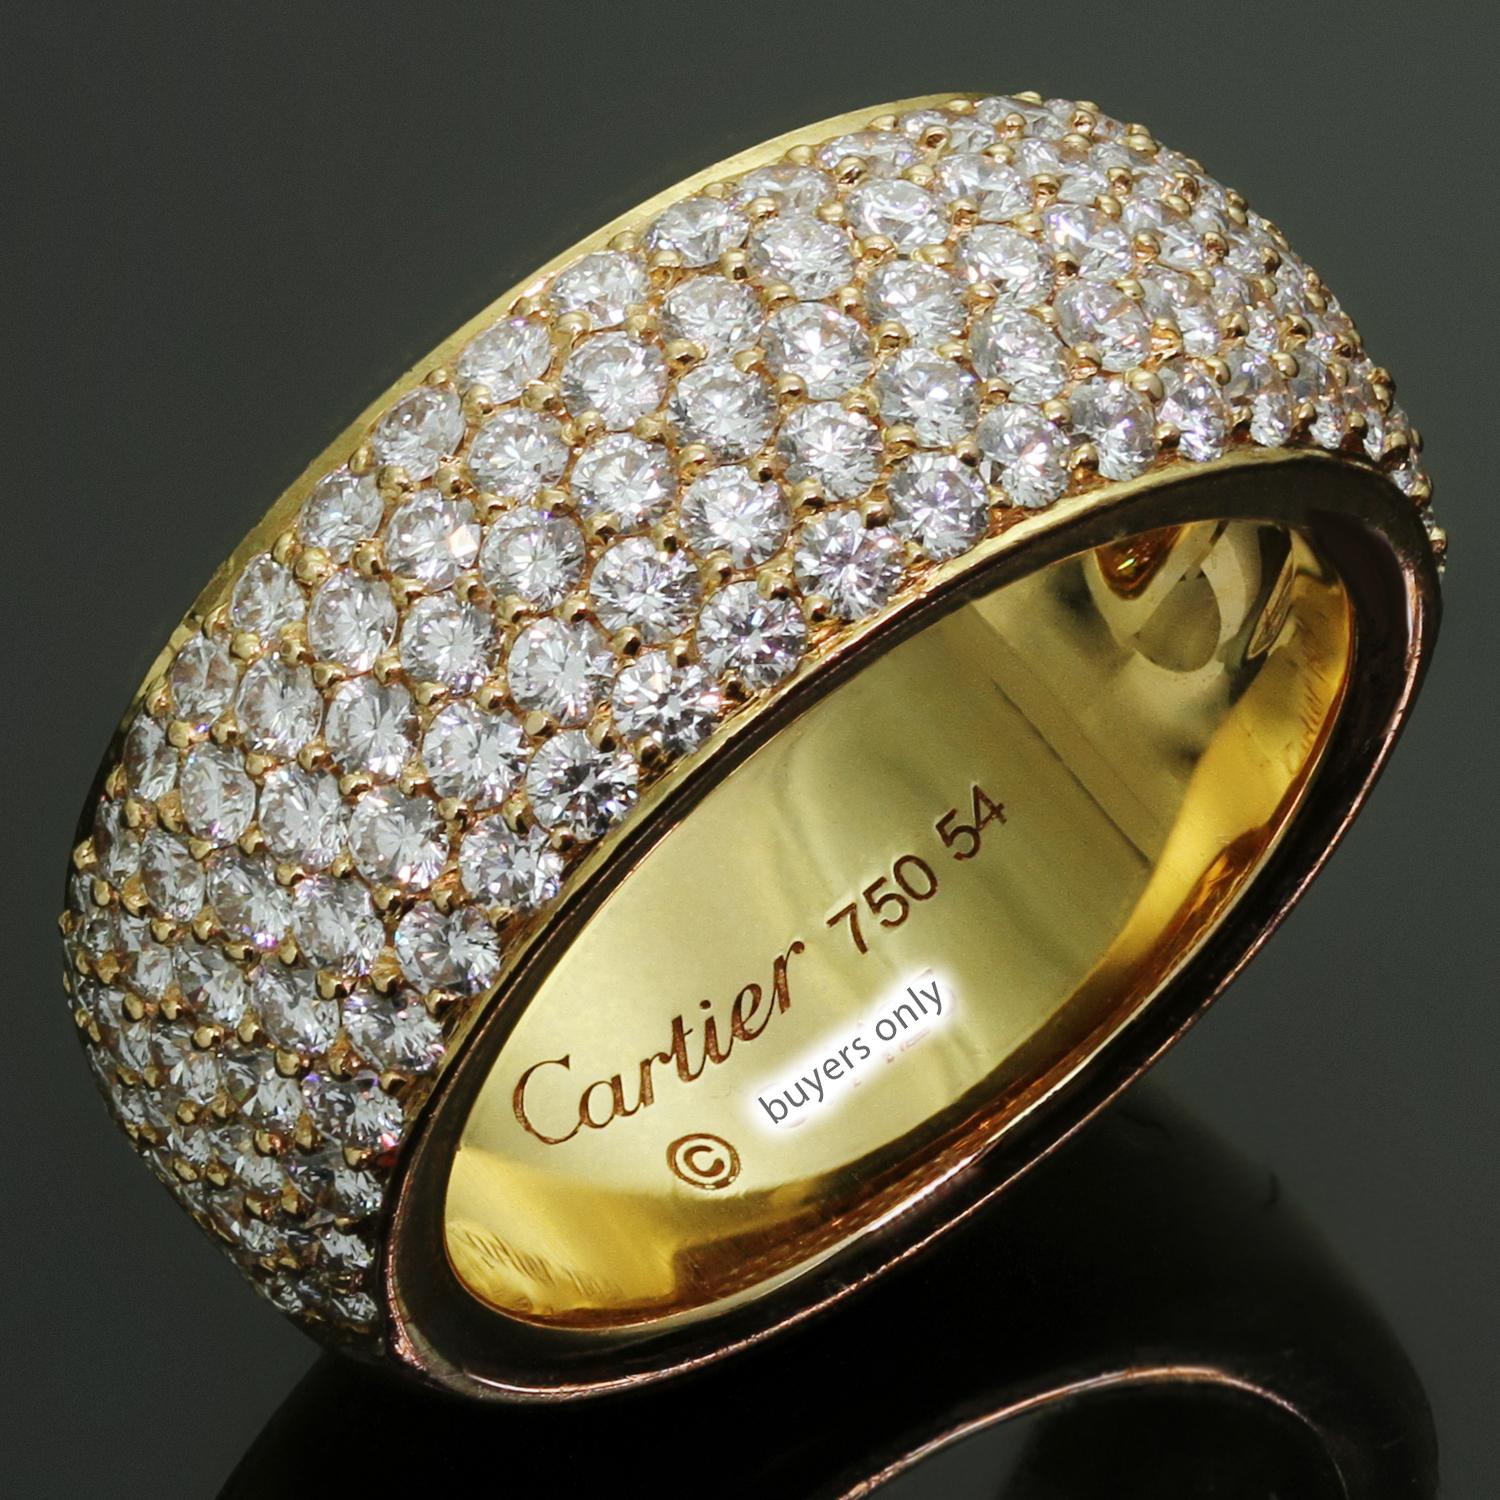 This fabulous Cartier 5-row wide band ring is crafted in 18k yellow gold and pave-set with brilliant-cut round D-E-F VVS1-VVS2 diamonds weighing an estimated 2.0 carats. Made in France circa 2020s. Measurements: 0.31